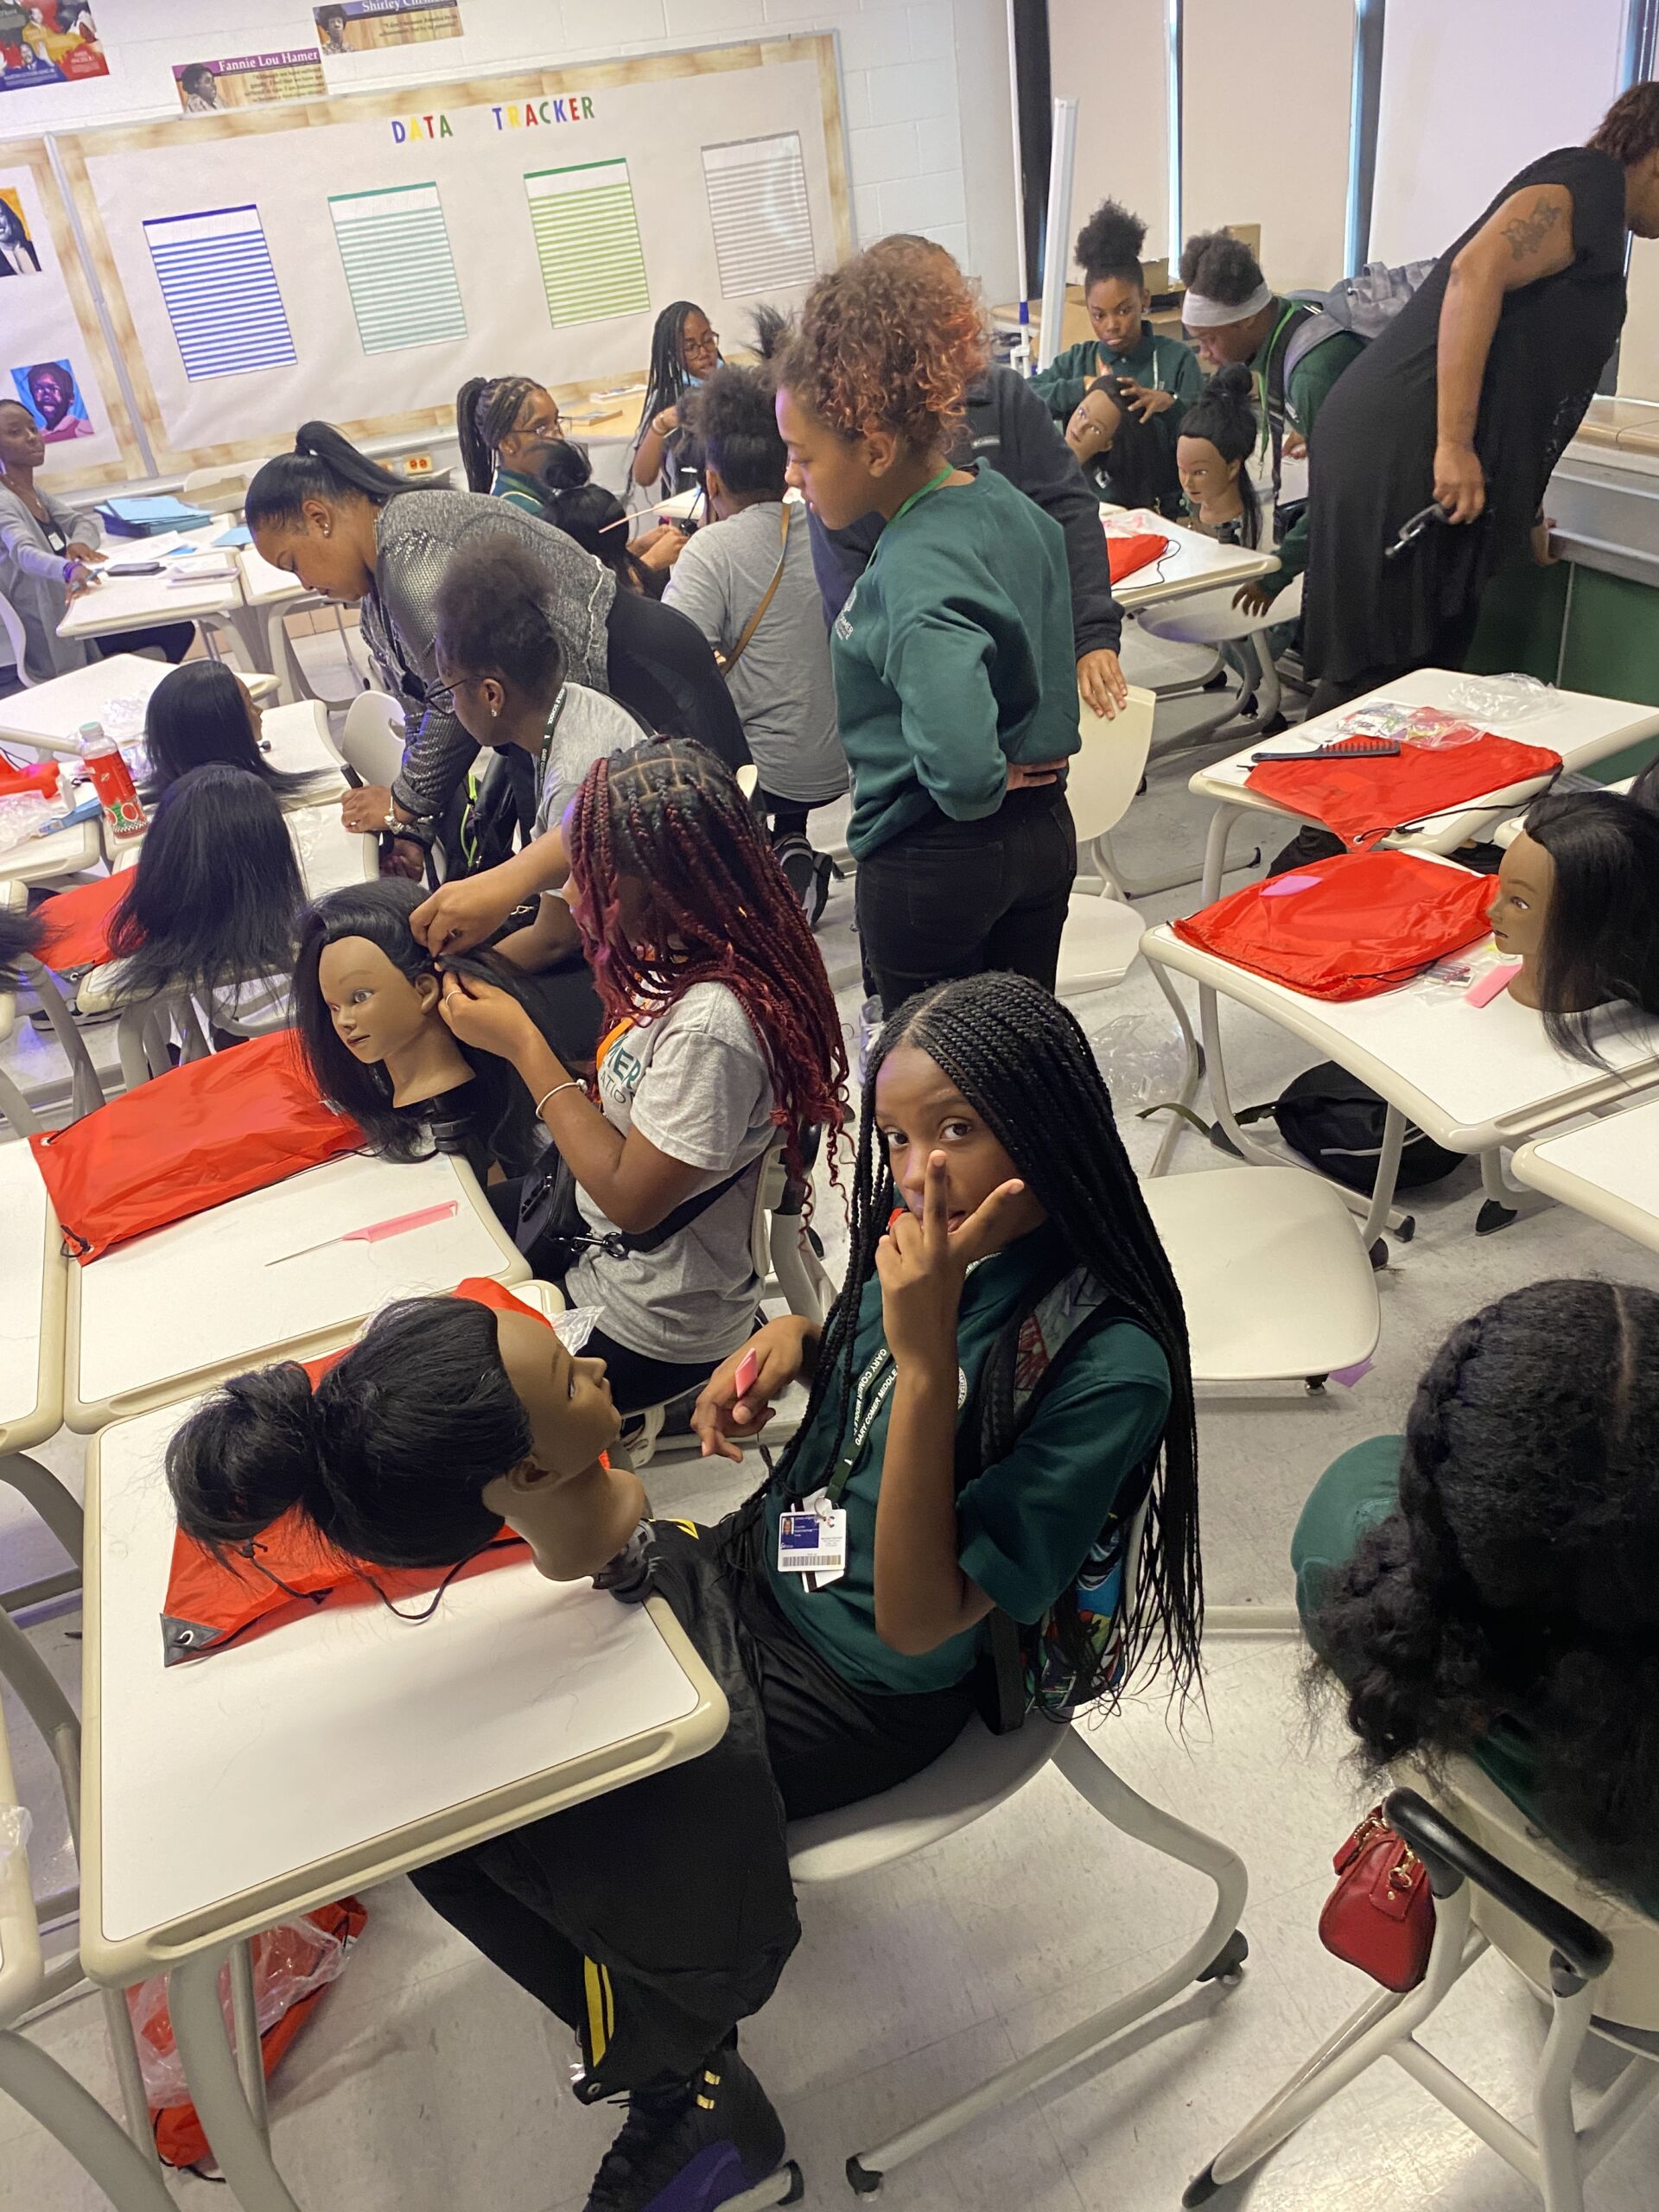 Gary Comer students sitting at desks braiding mannequin head hair. Some students are working together and talking.